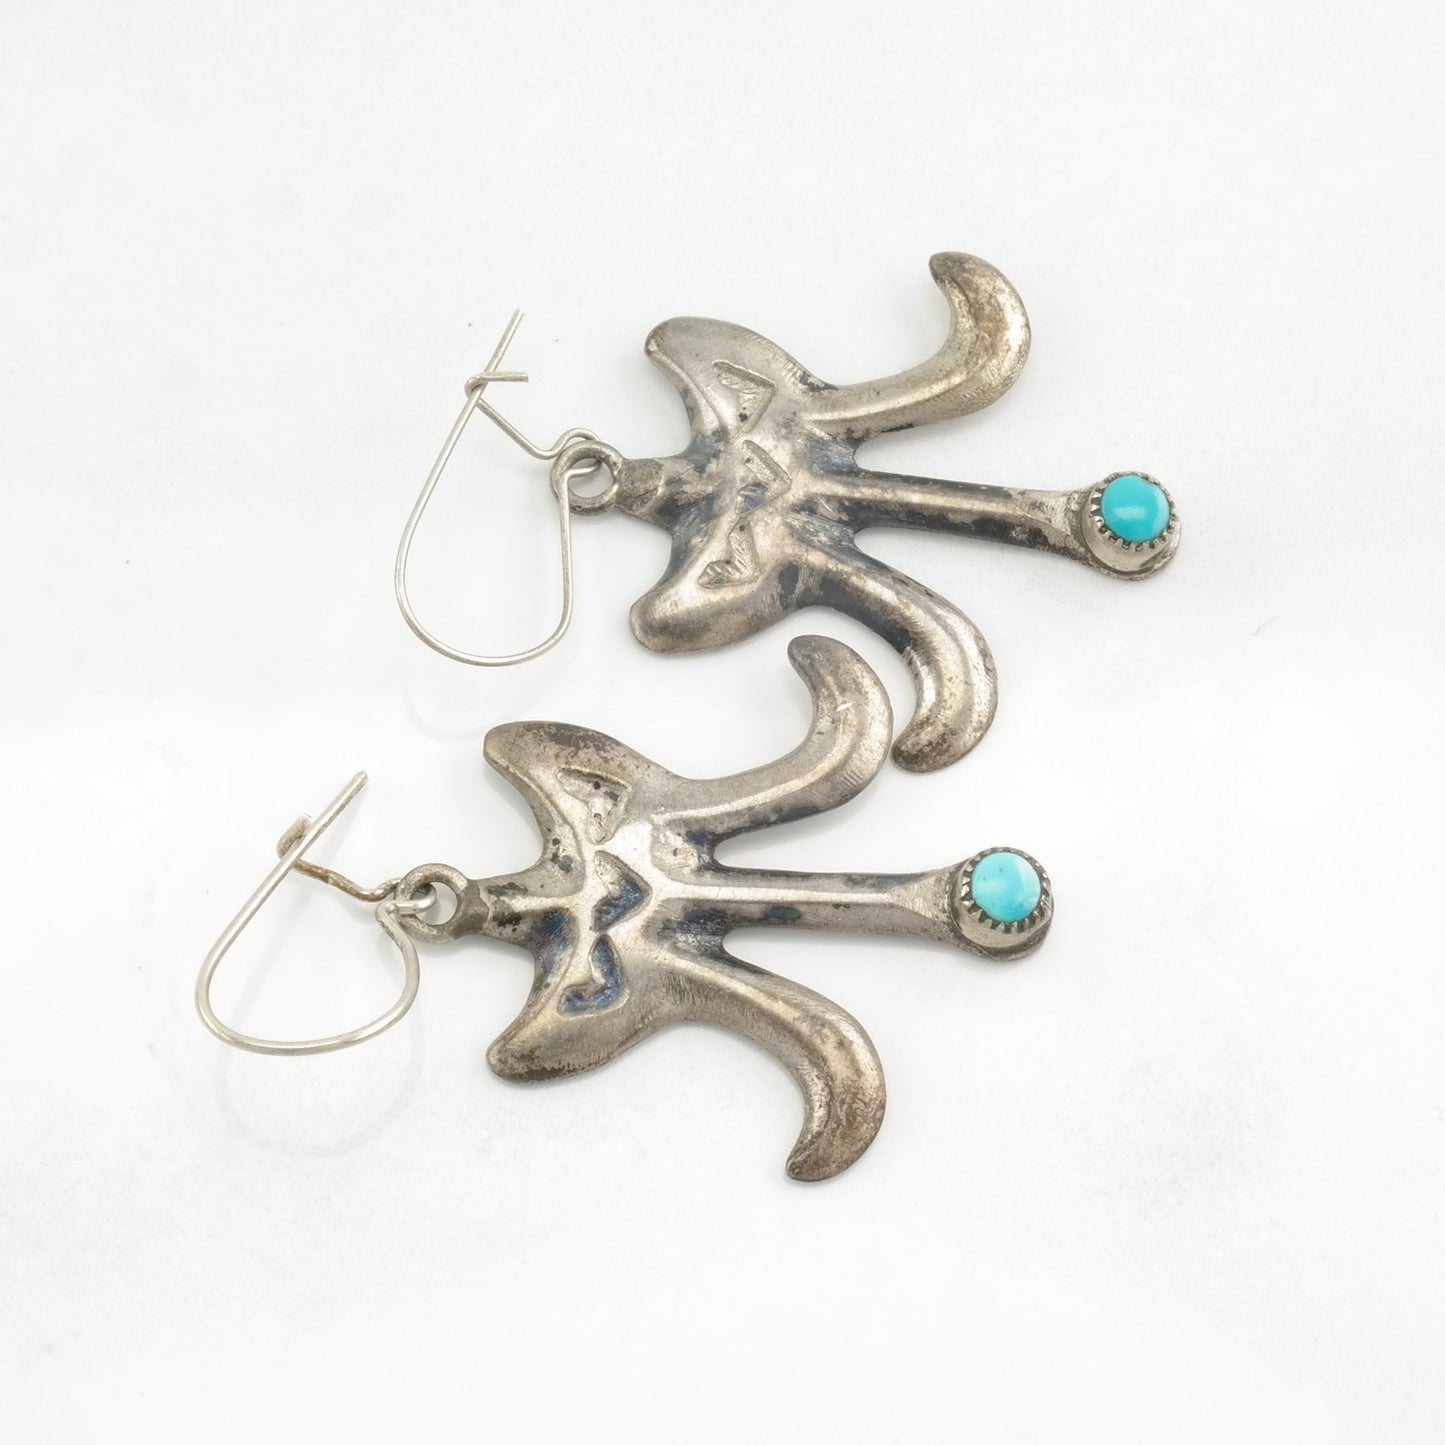 Native American Sterling Silver Turquoise Stamped, Sandcast, Earrings Fish Hook, Dangle